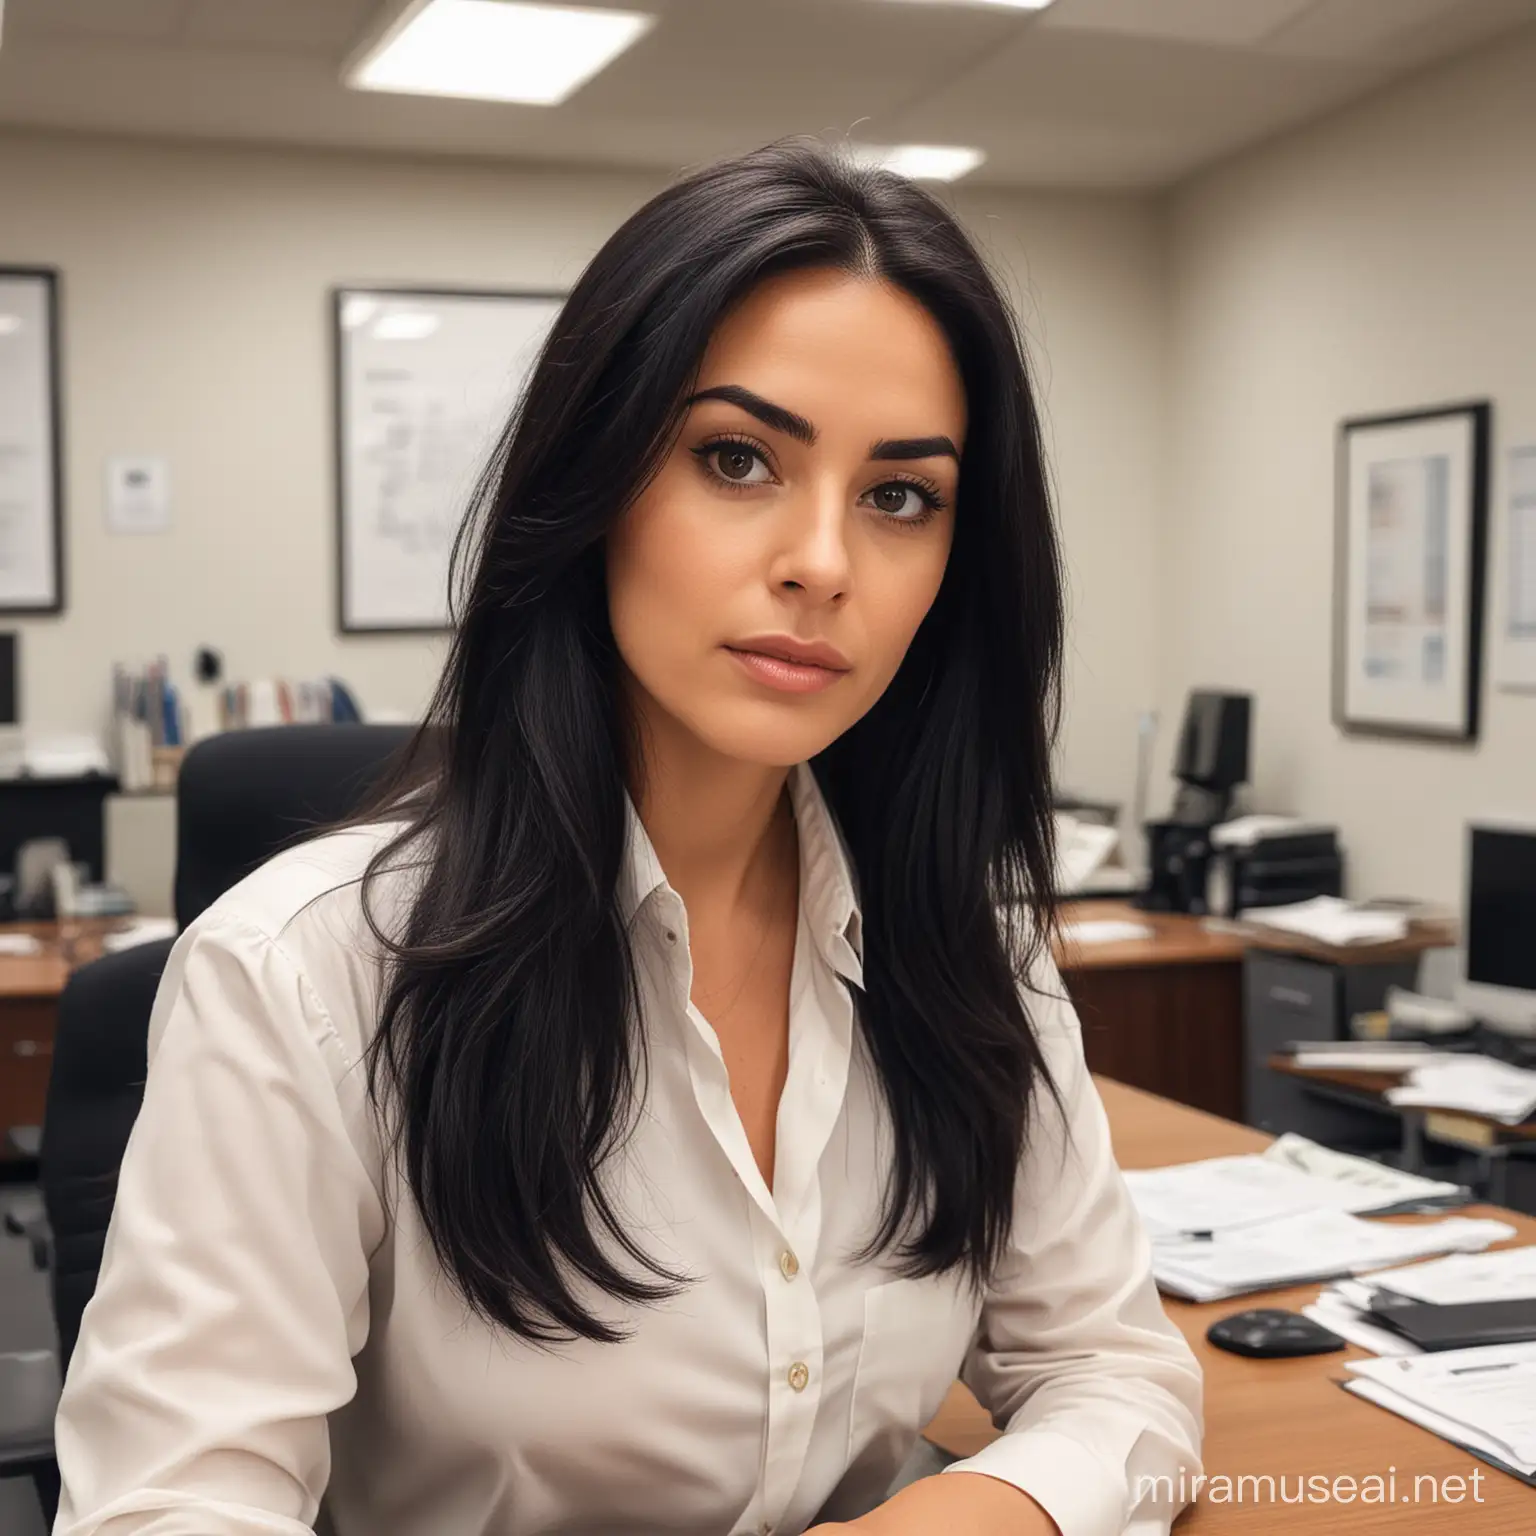 A female lawyer with long, thick black hair and dark brown eyes. She wears a moon buttoned shirt and works in an office in her own building. She has an oval face with thick eyebrows

